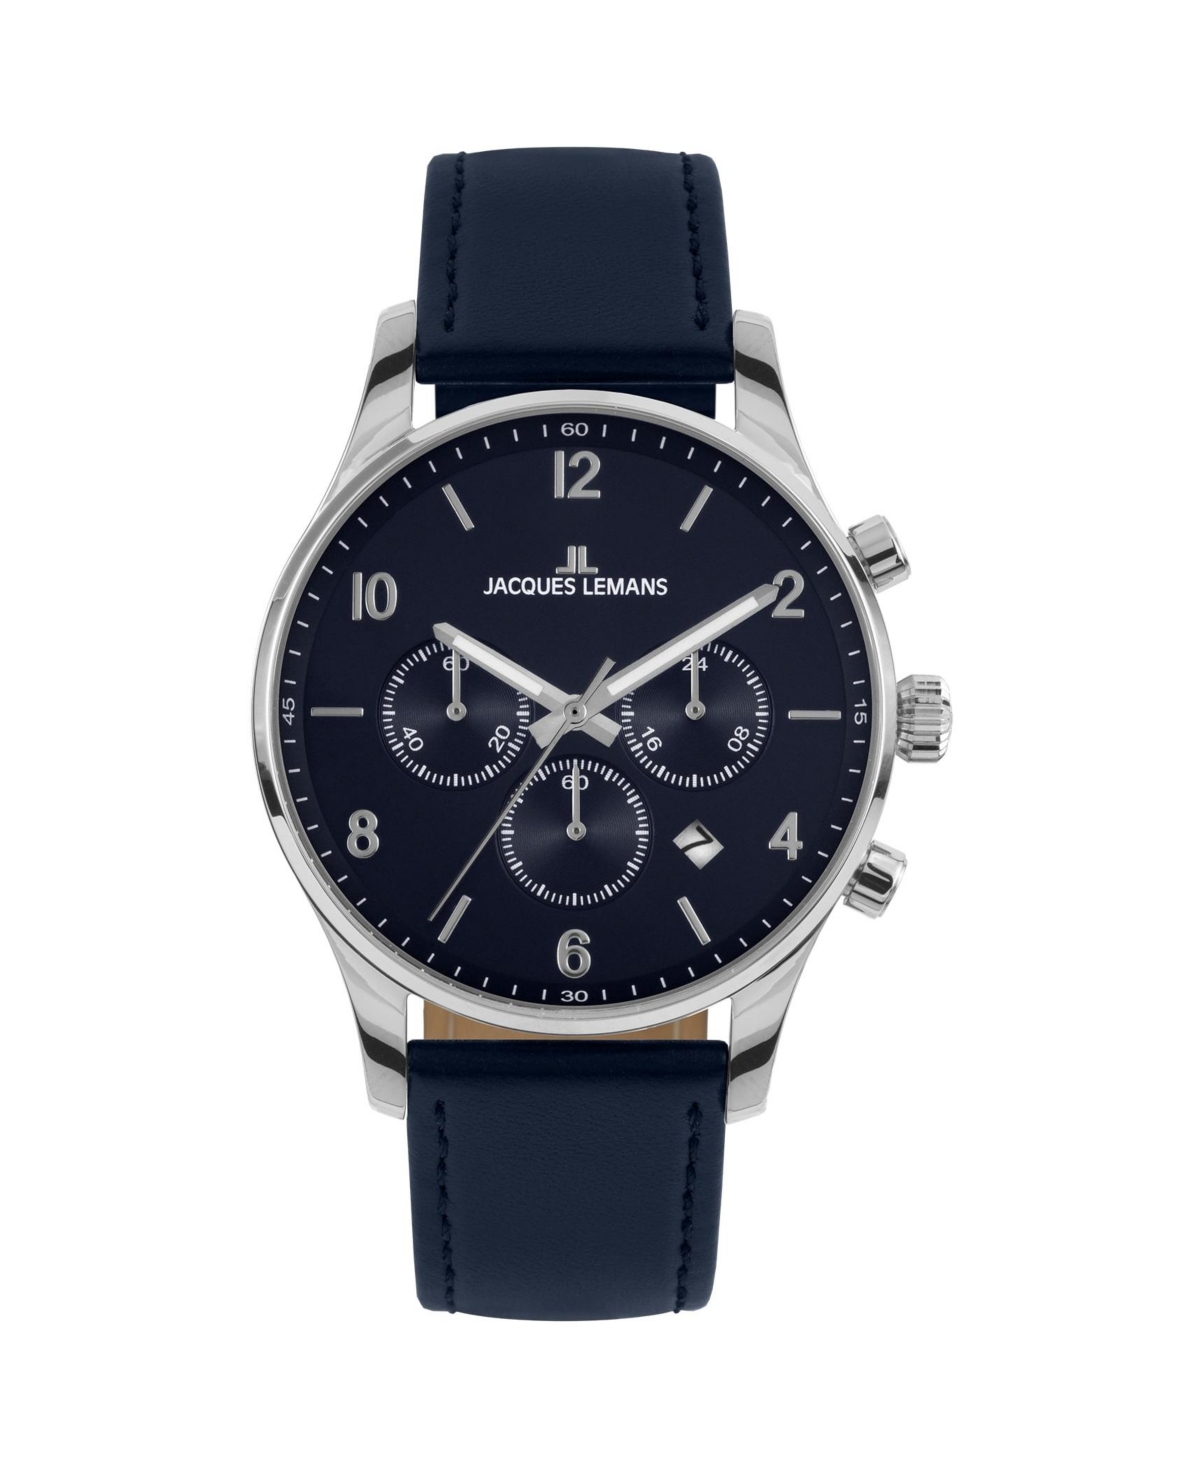 Men's London Watch with Leather Strap, Solid Stainless Steel, Chronograph, 1-2126 - Dark blue